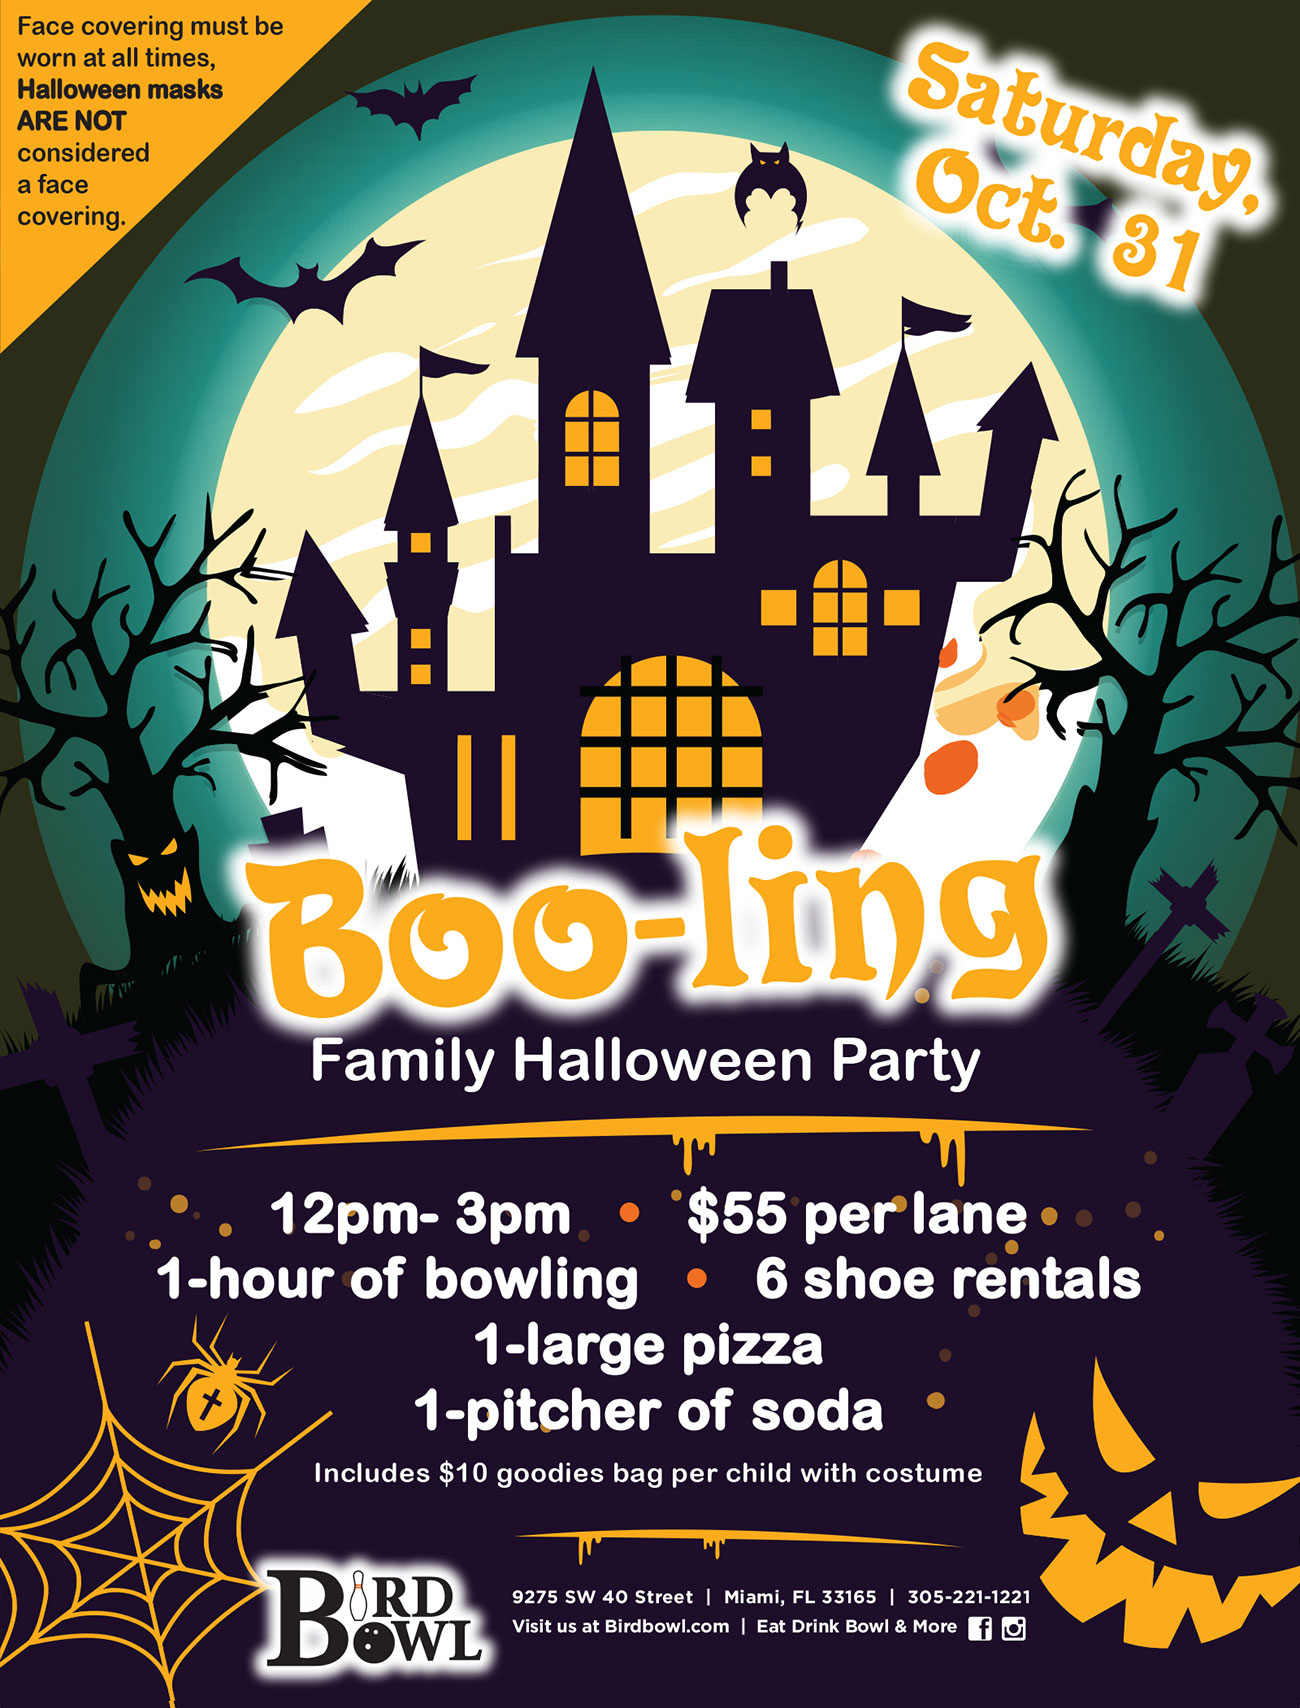 Boo-ling Family Halloween Party Flyer